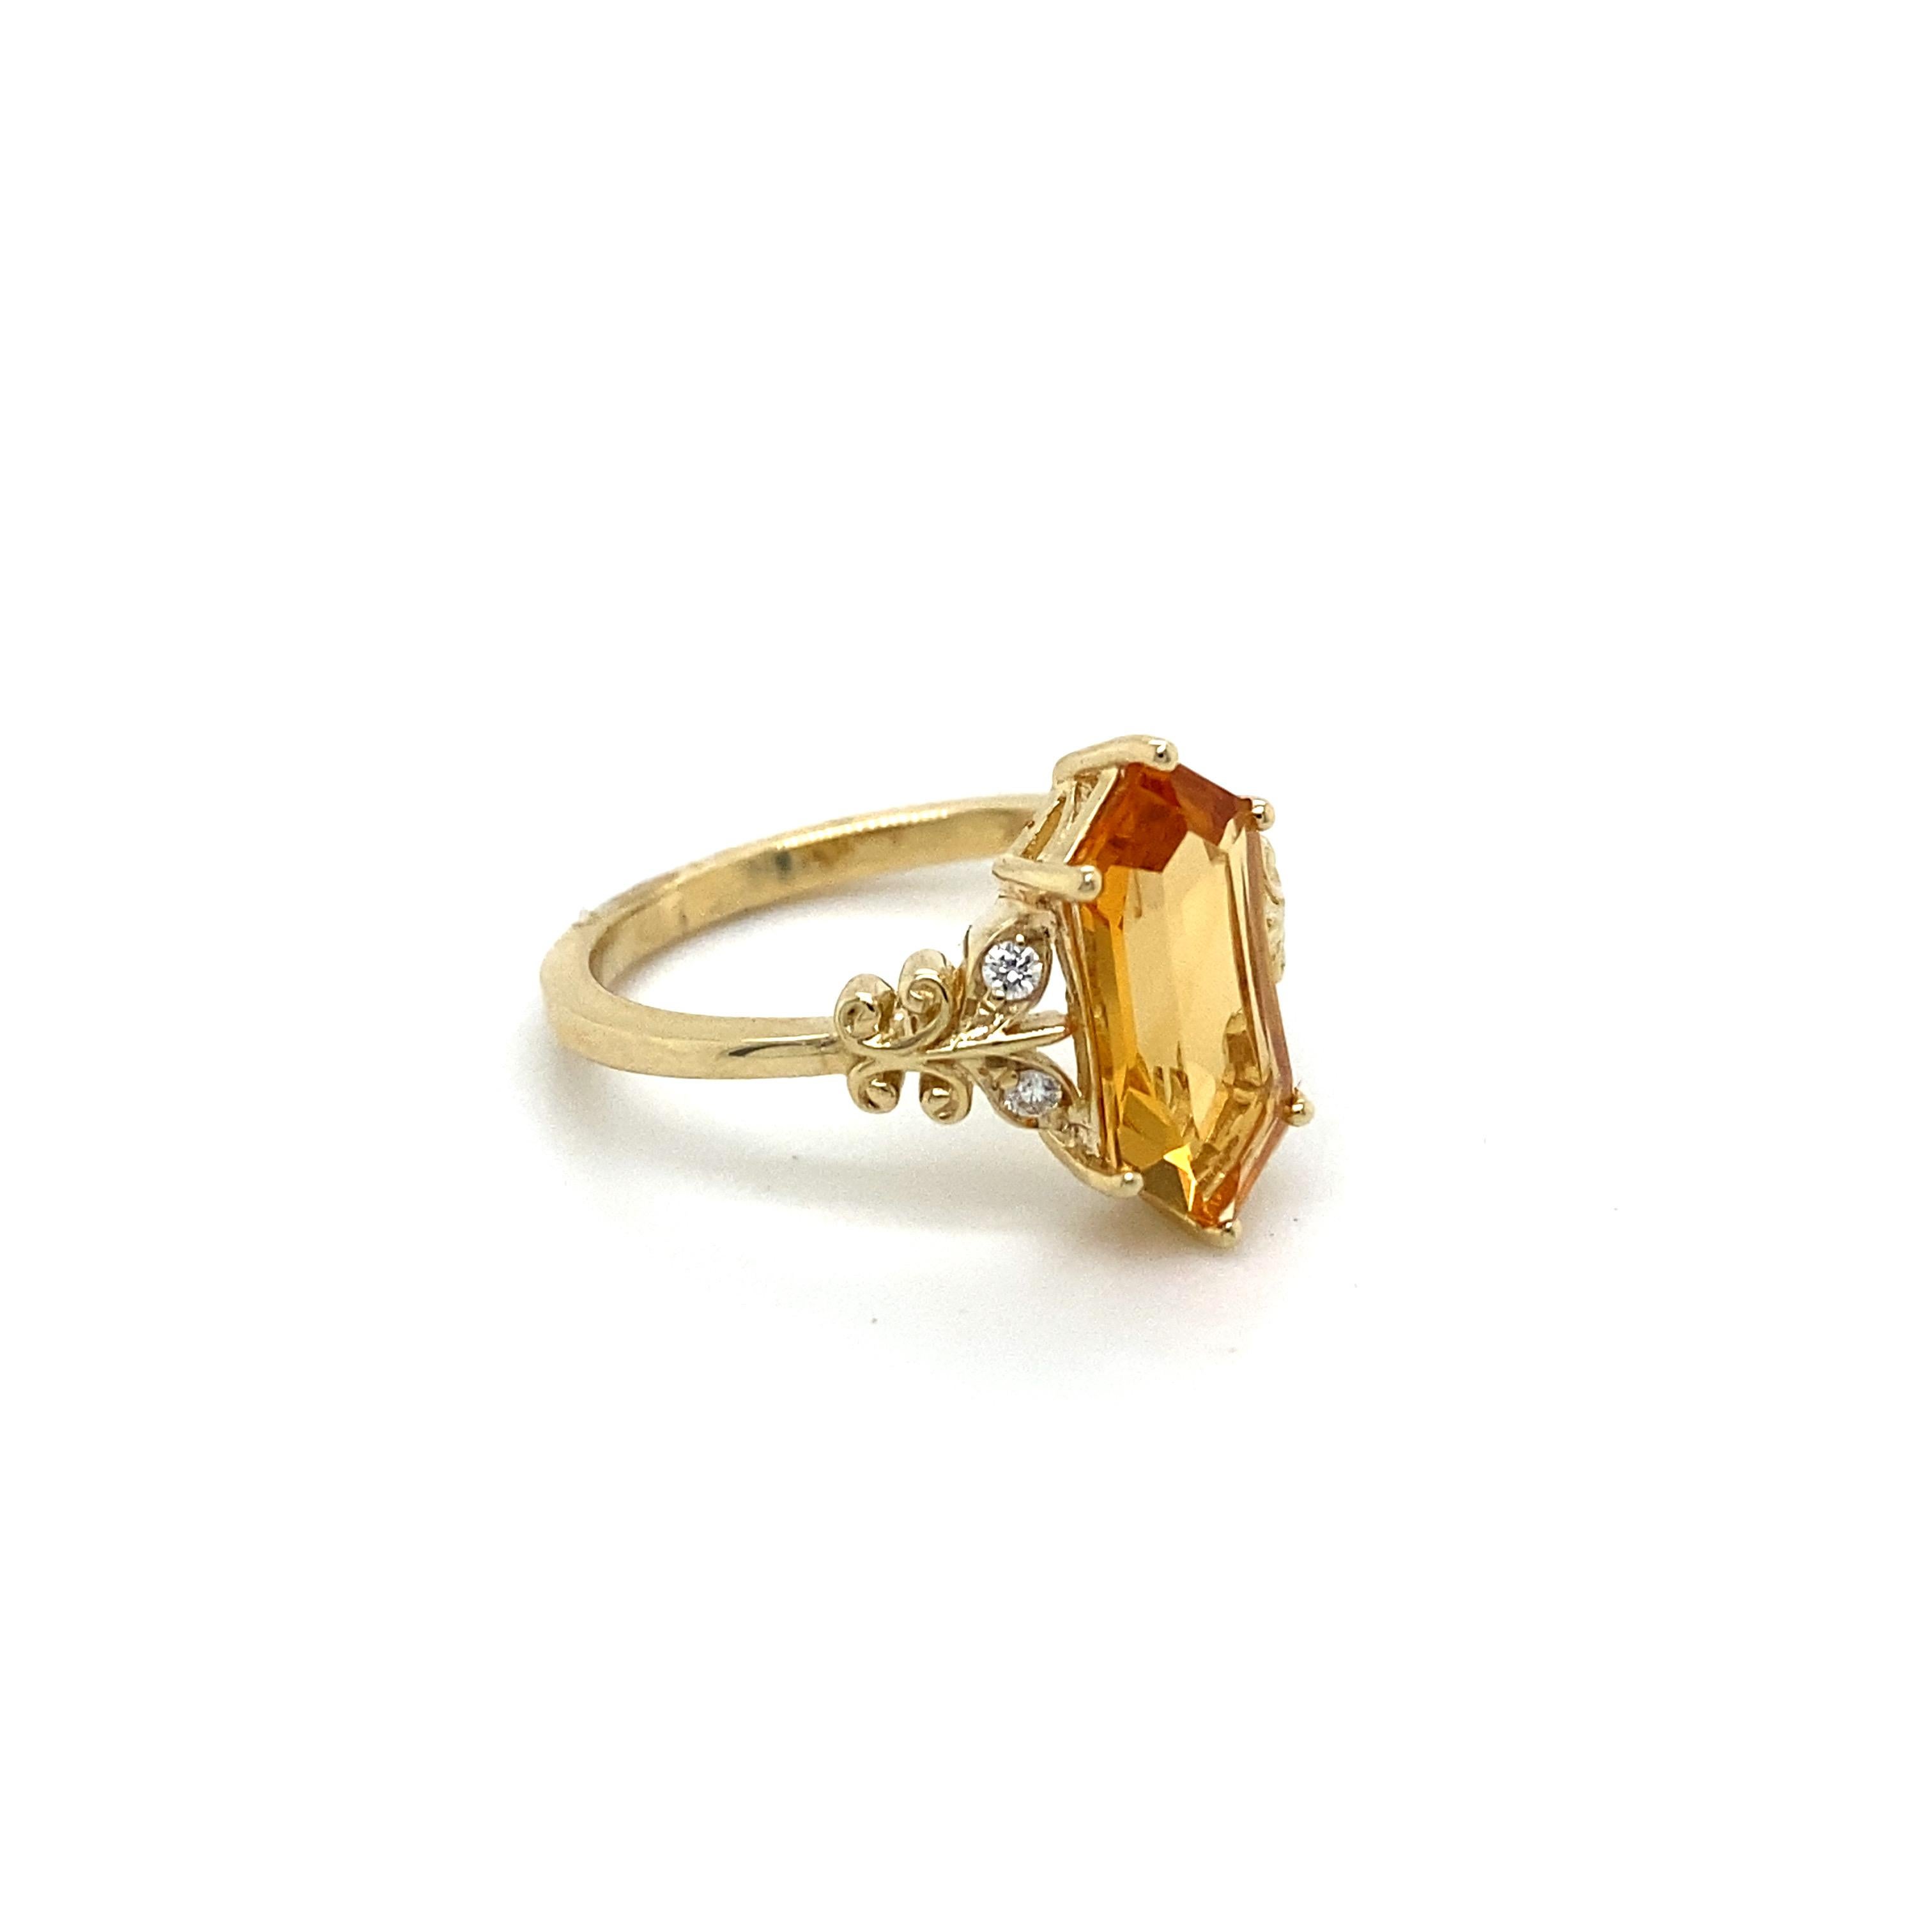 For Sale:  Hexagonal Citrine Ring with Diamonds and 6 Sides 2.15 Carat Total Weight 2